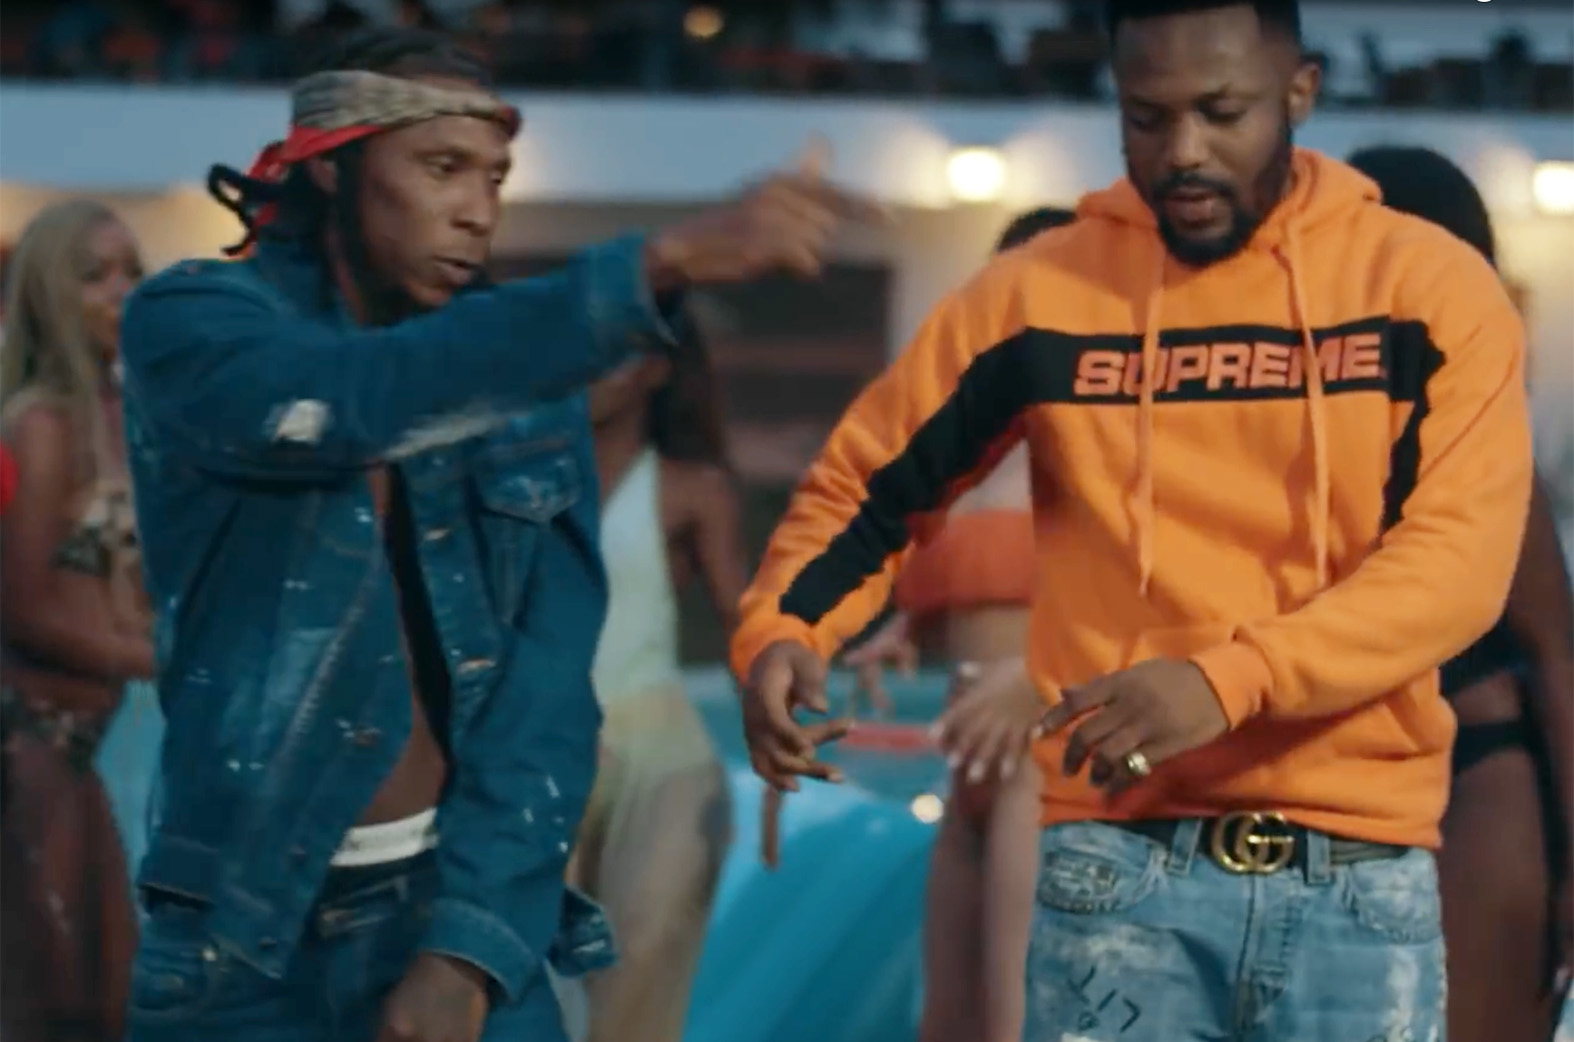 Video: We De Vibe by R2bees